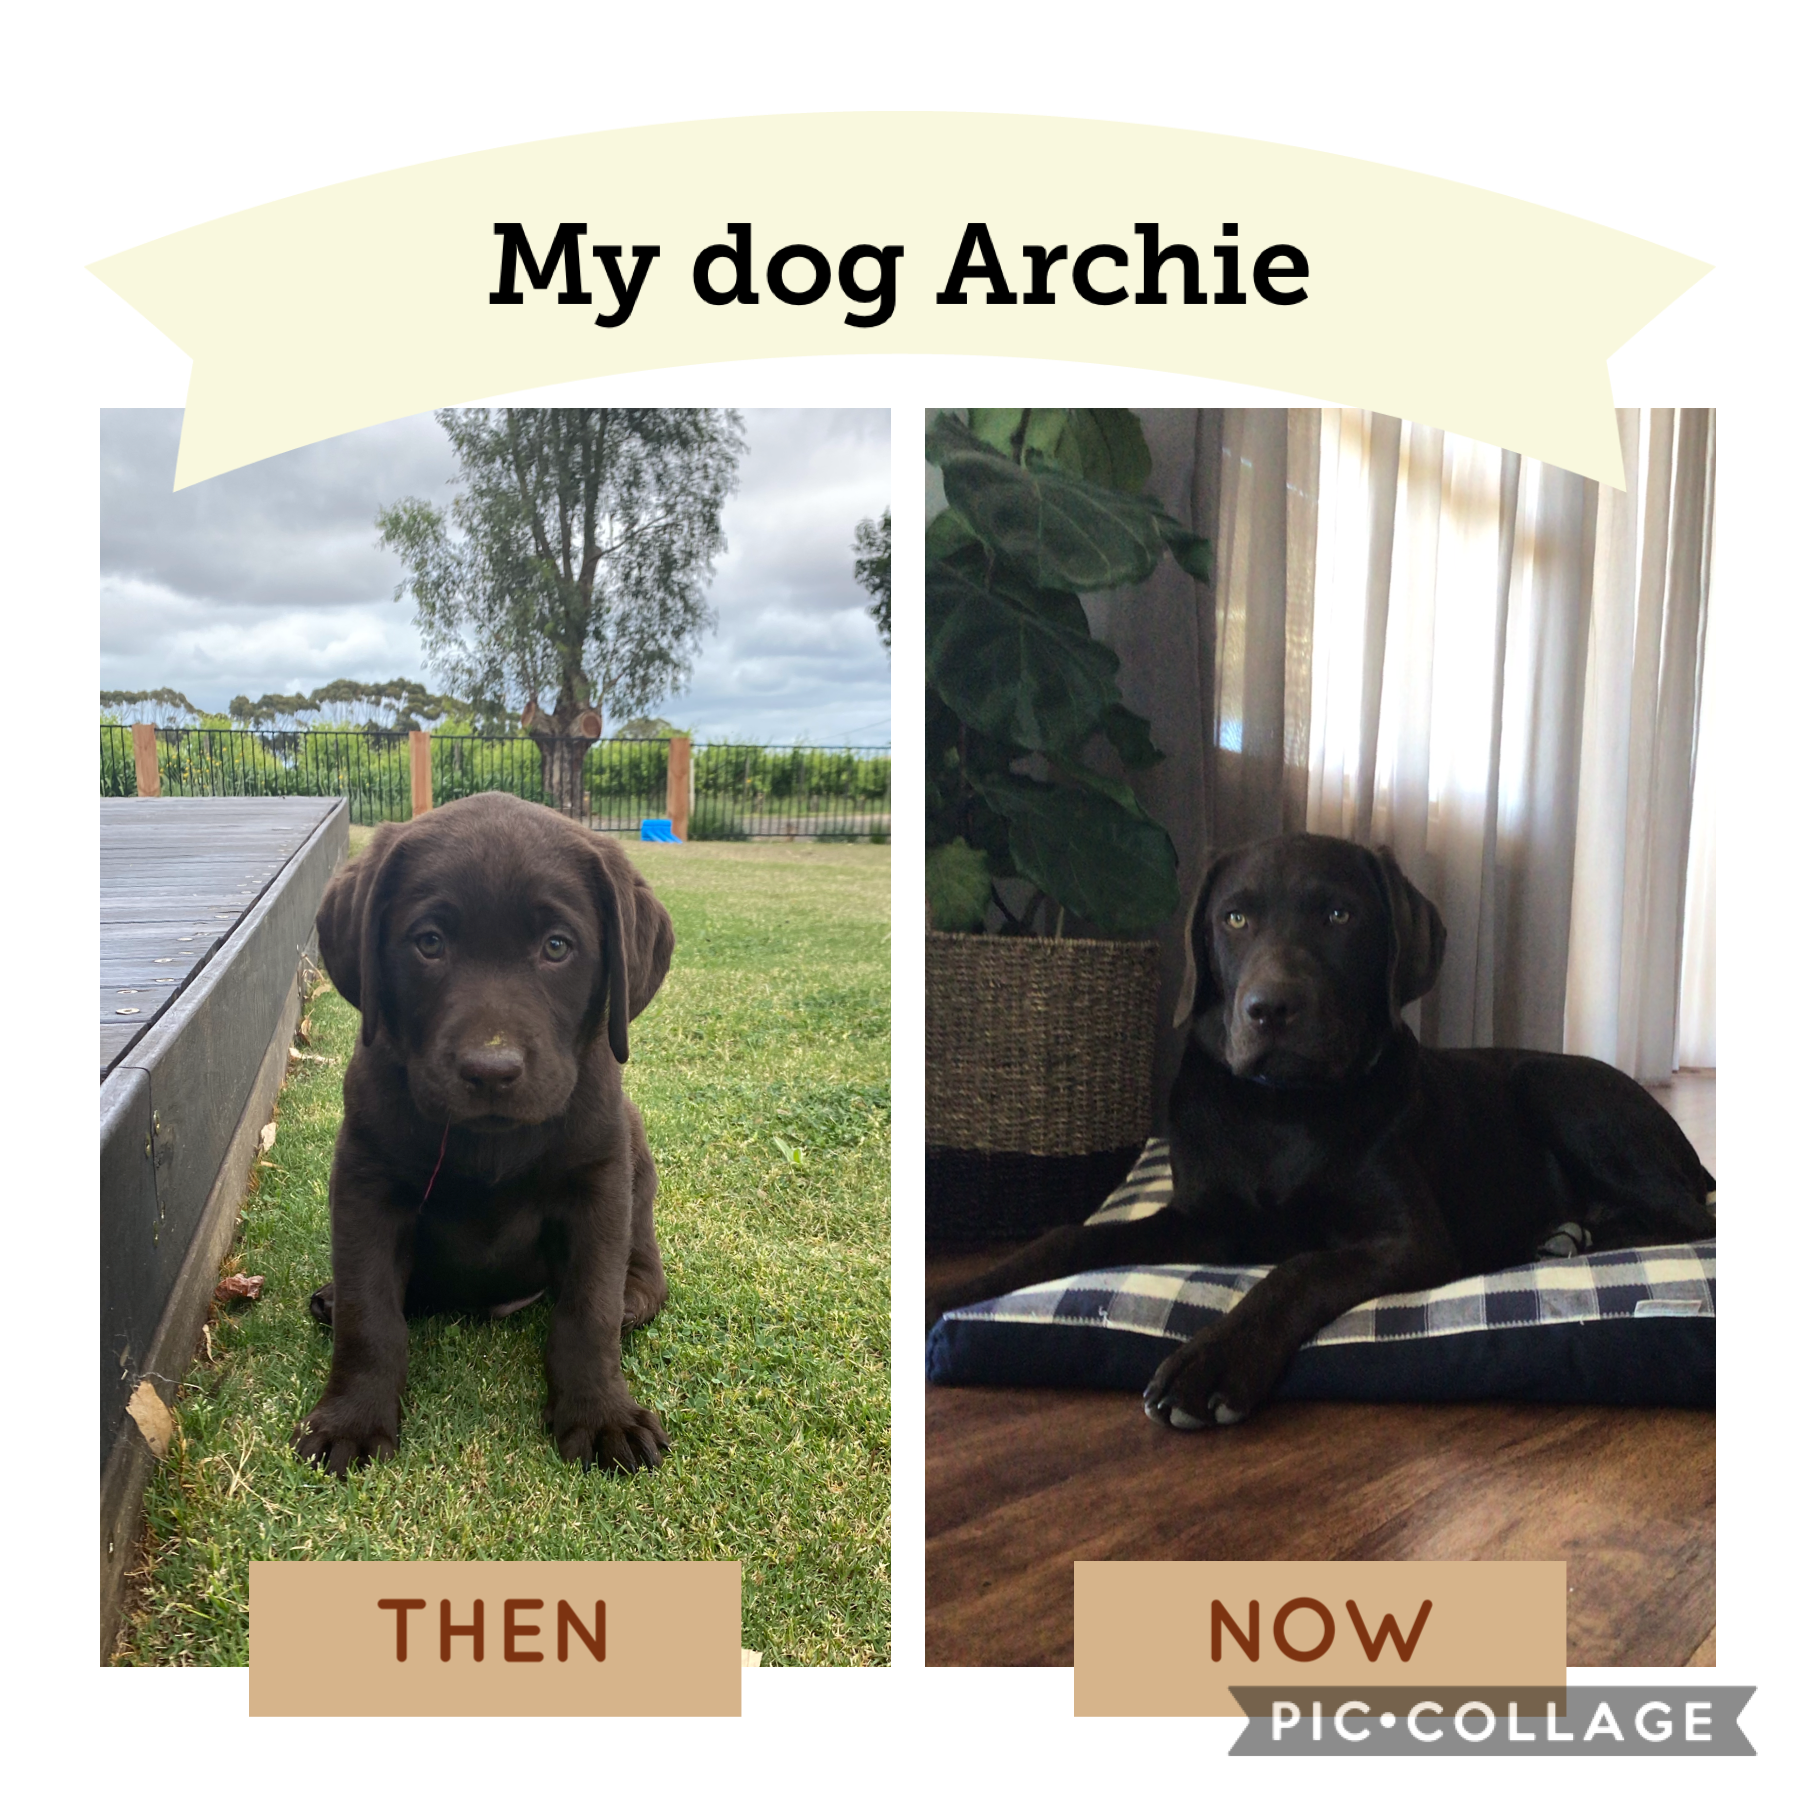 This is my dog Archie he is a chocolate lab